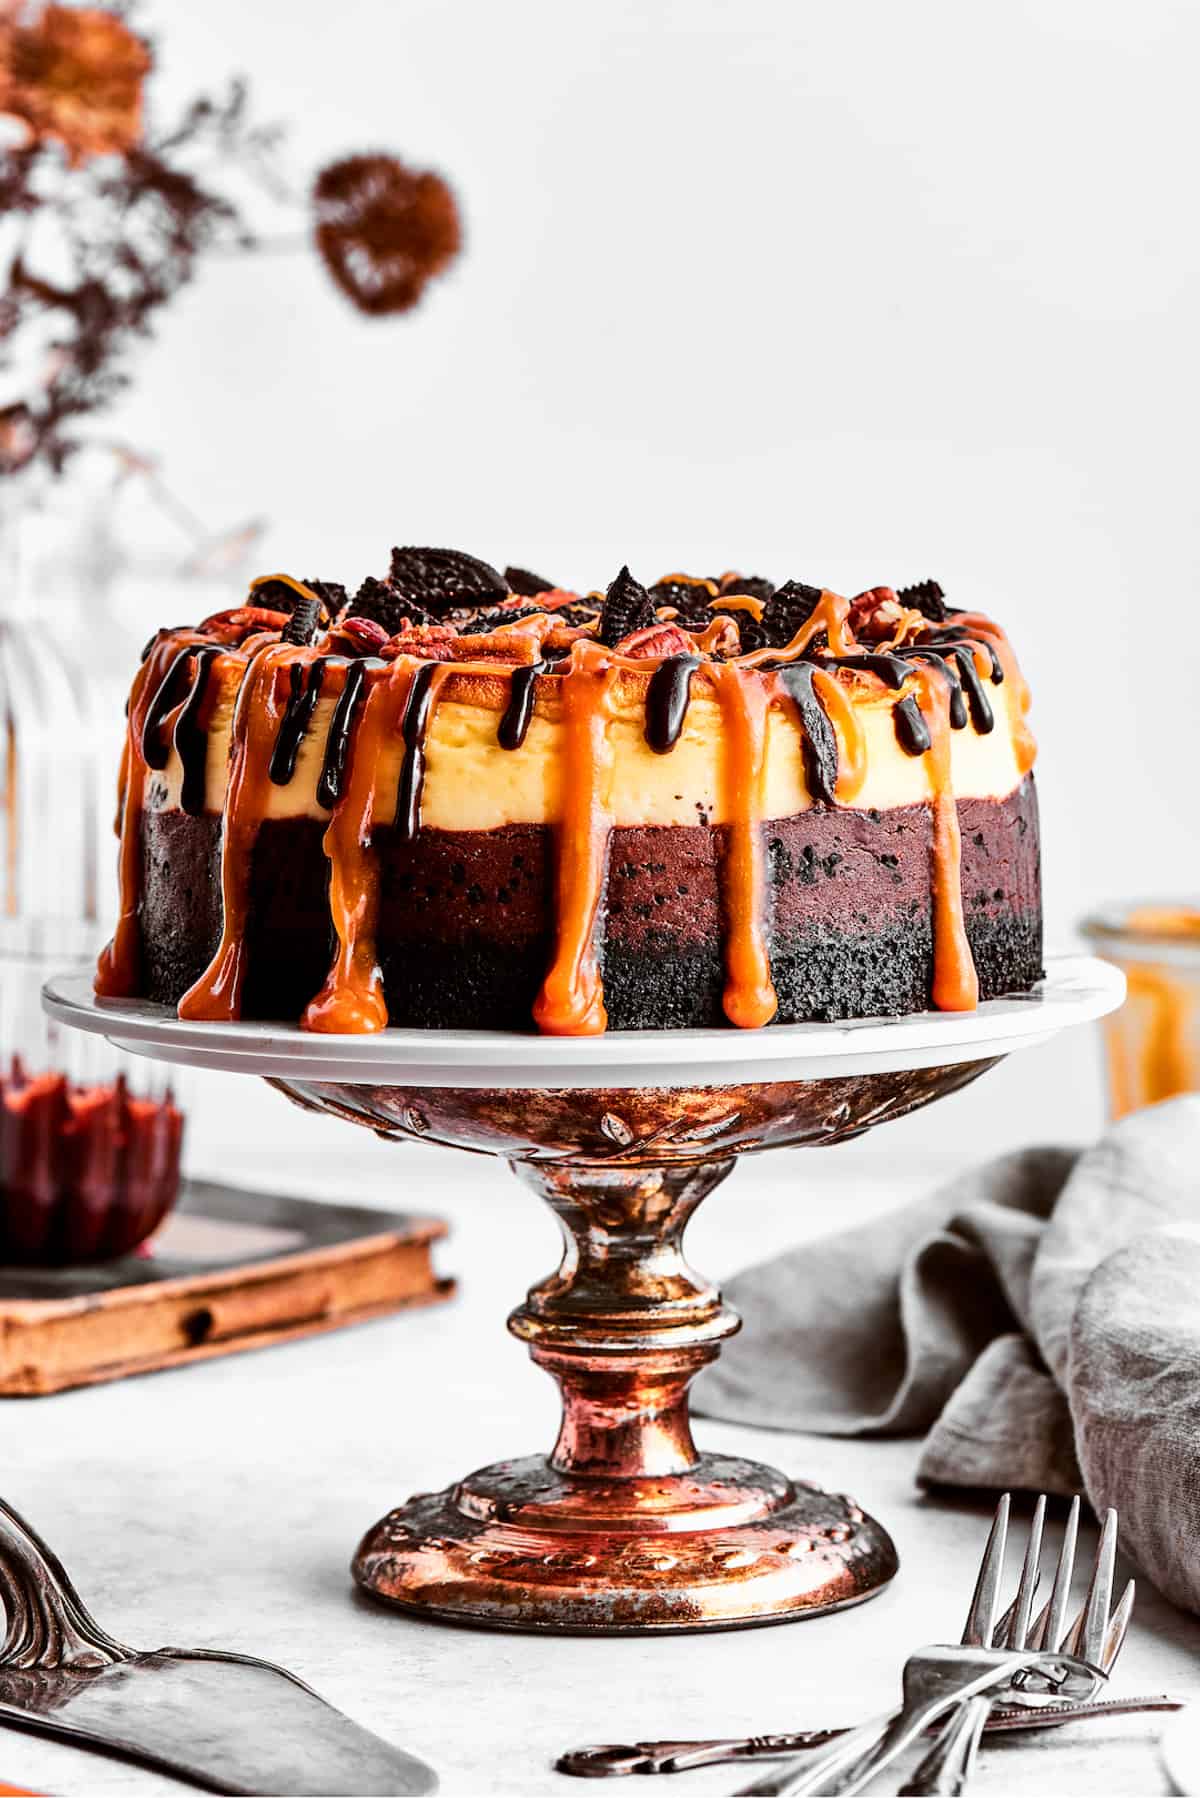 A turtle cheesecake dripping with caramel sauce is displayed on a bronze cake stand.